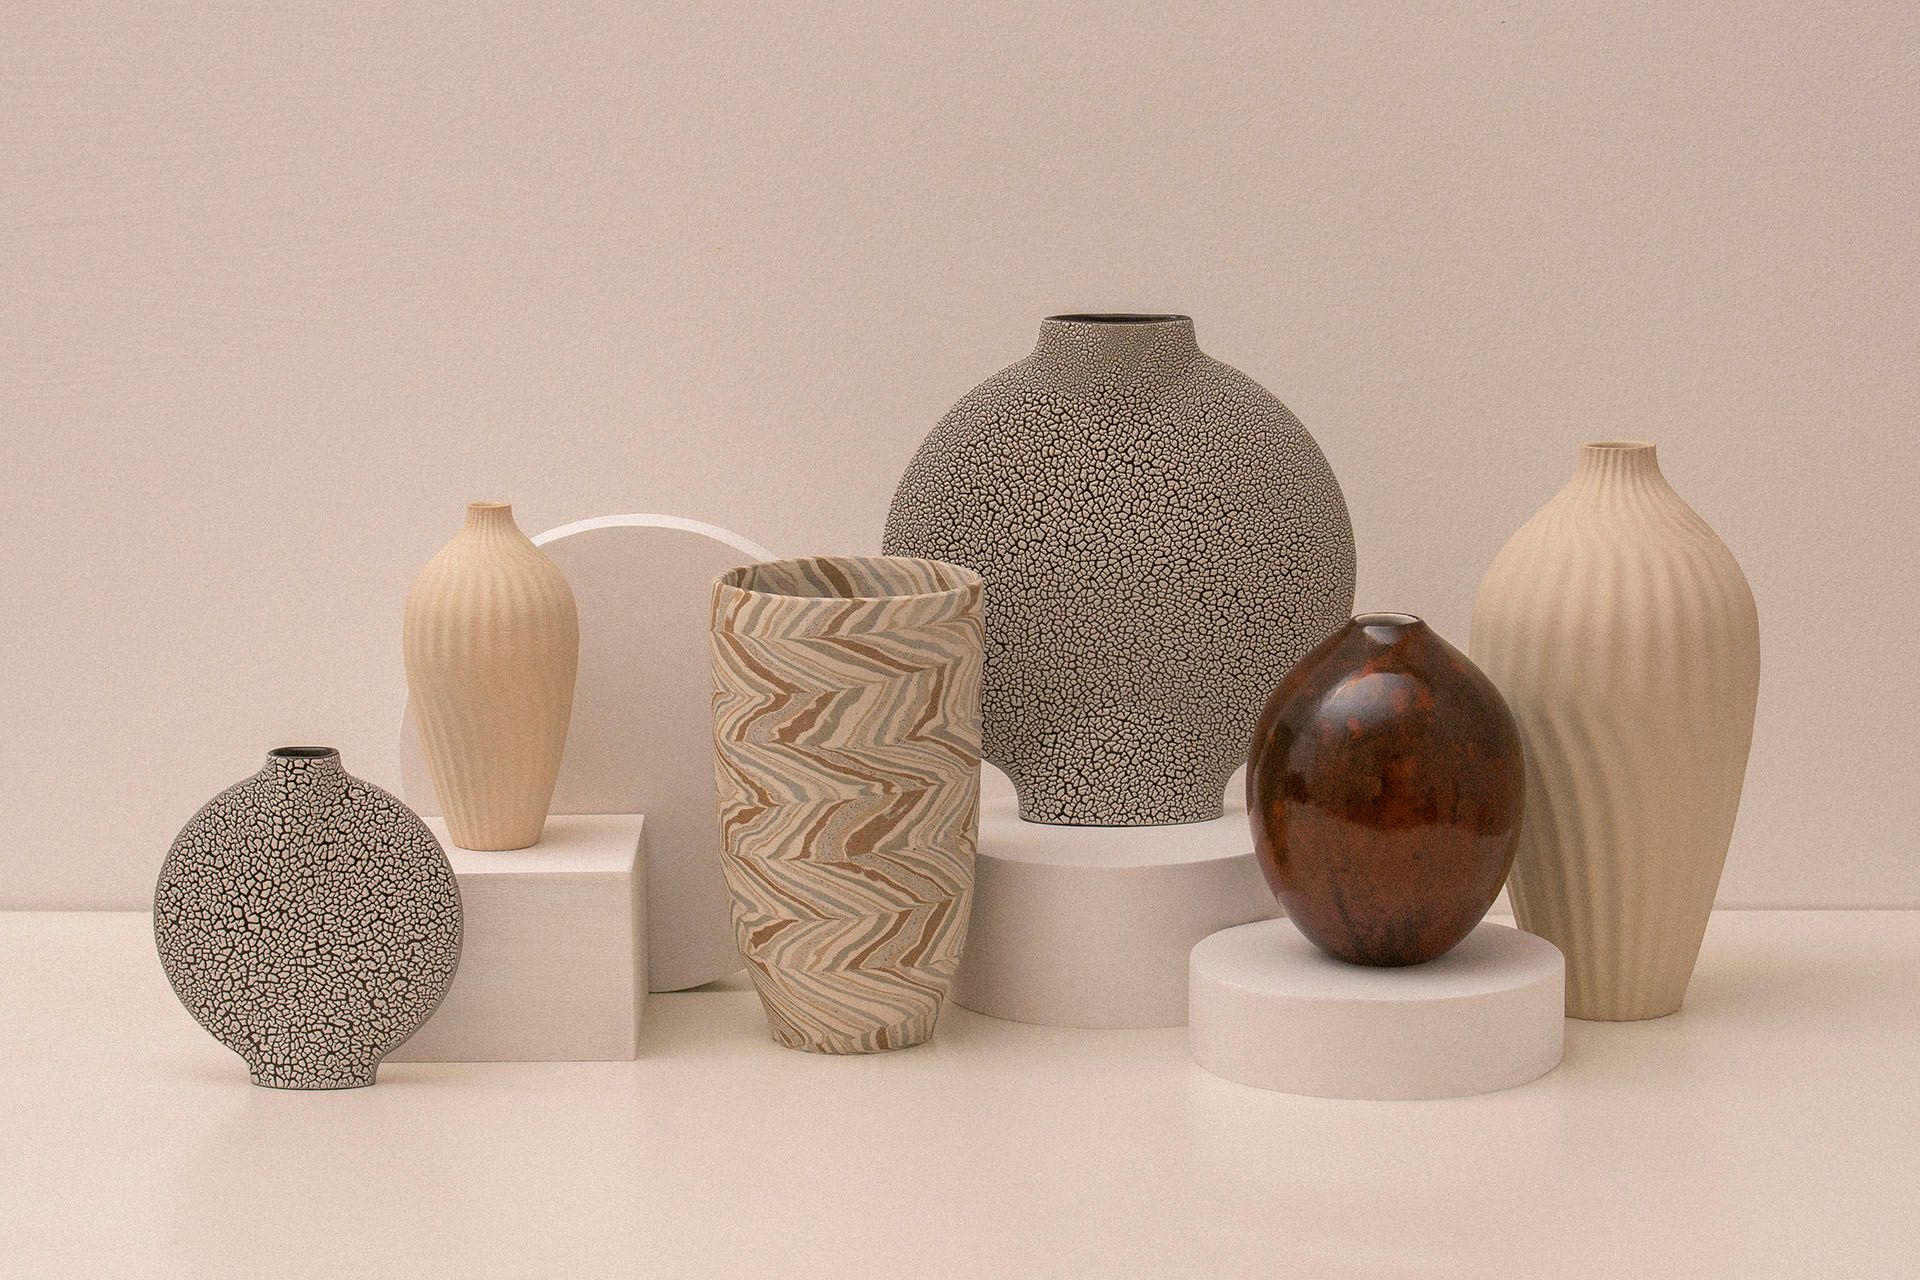 Landscape and identity as told through ceramics